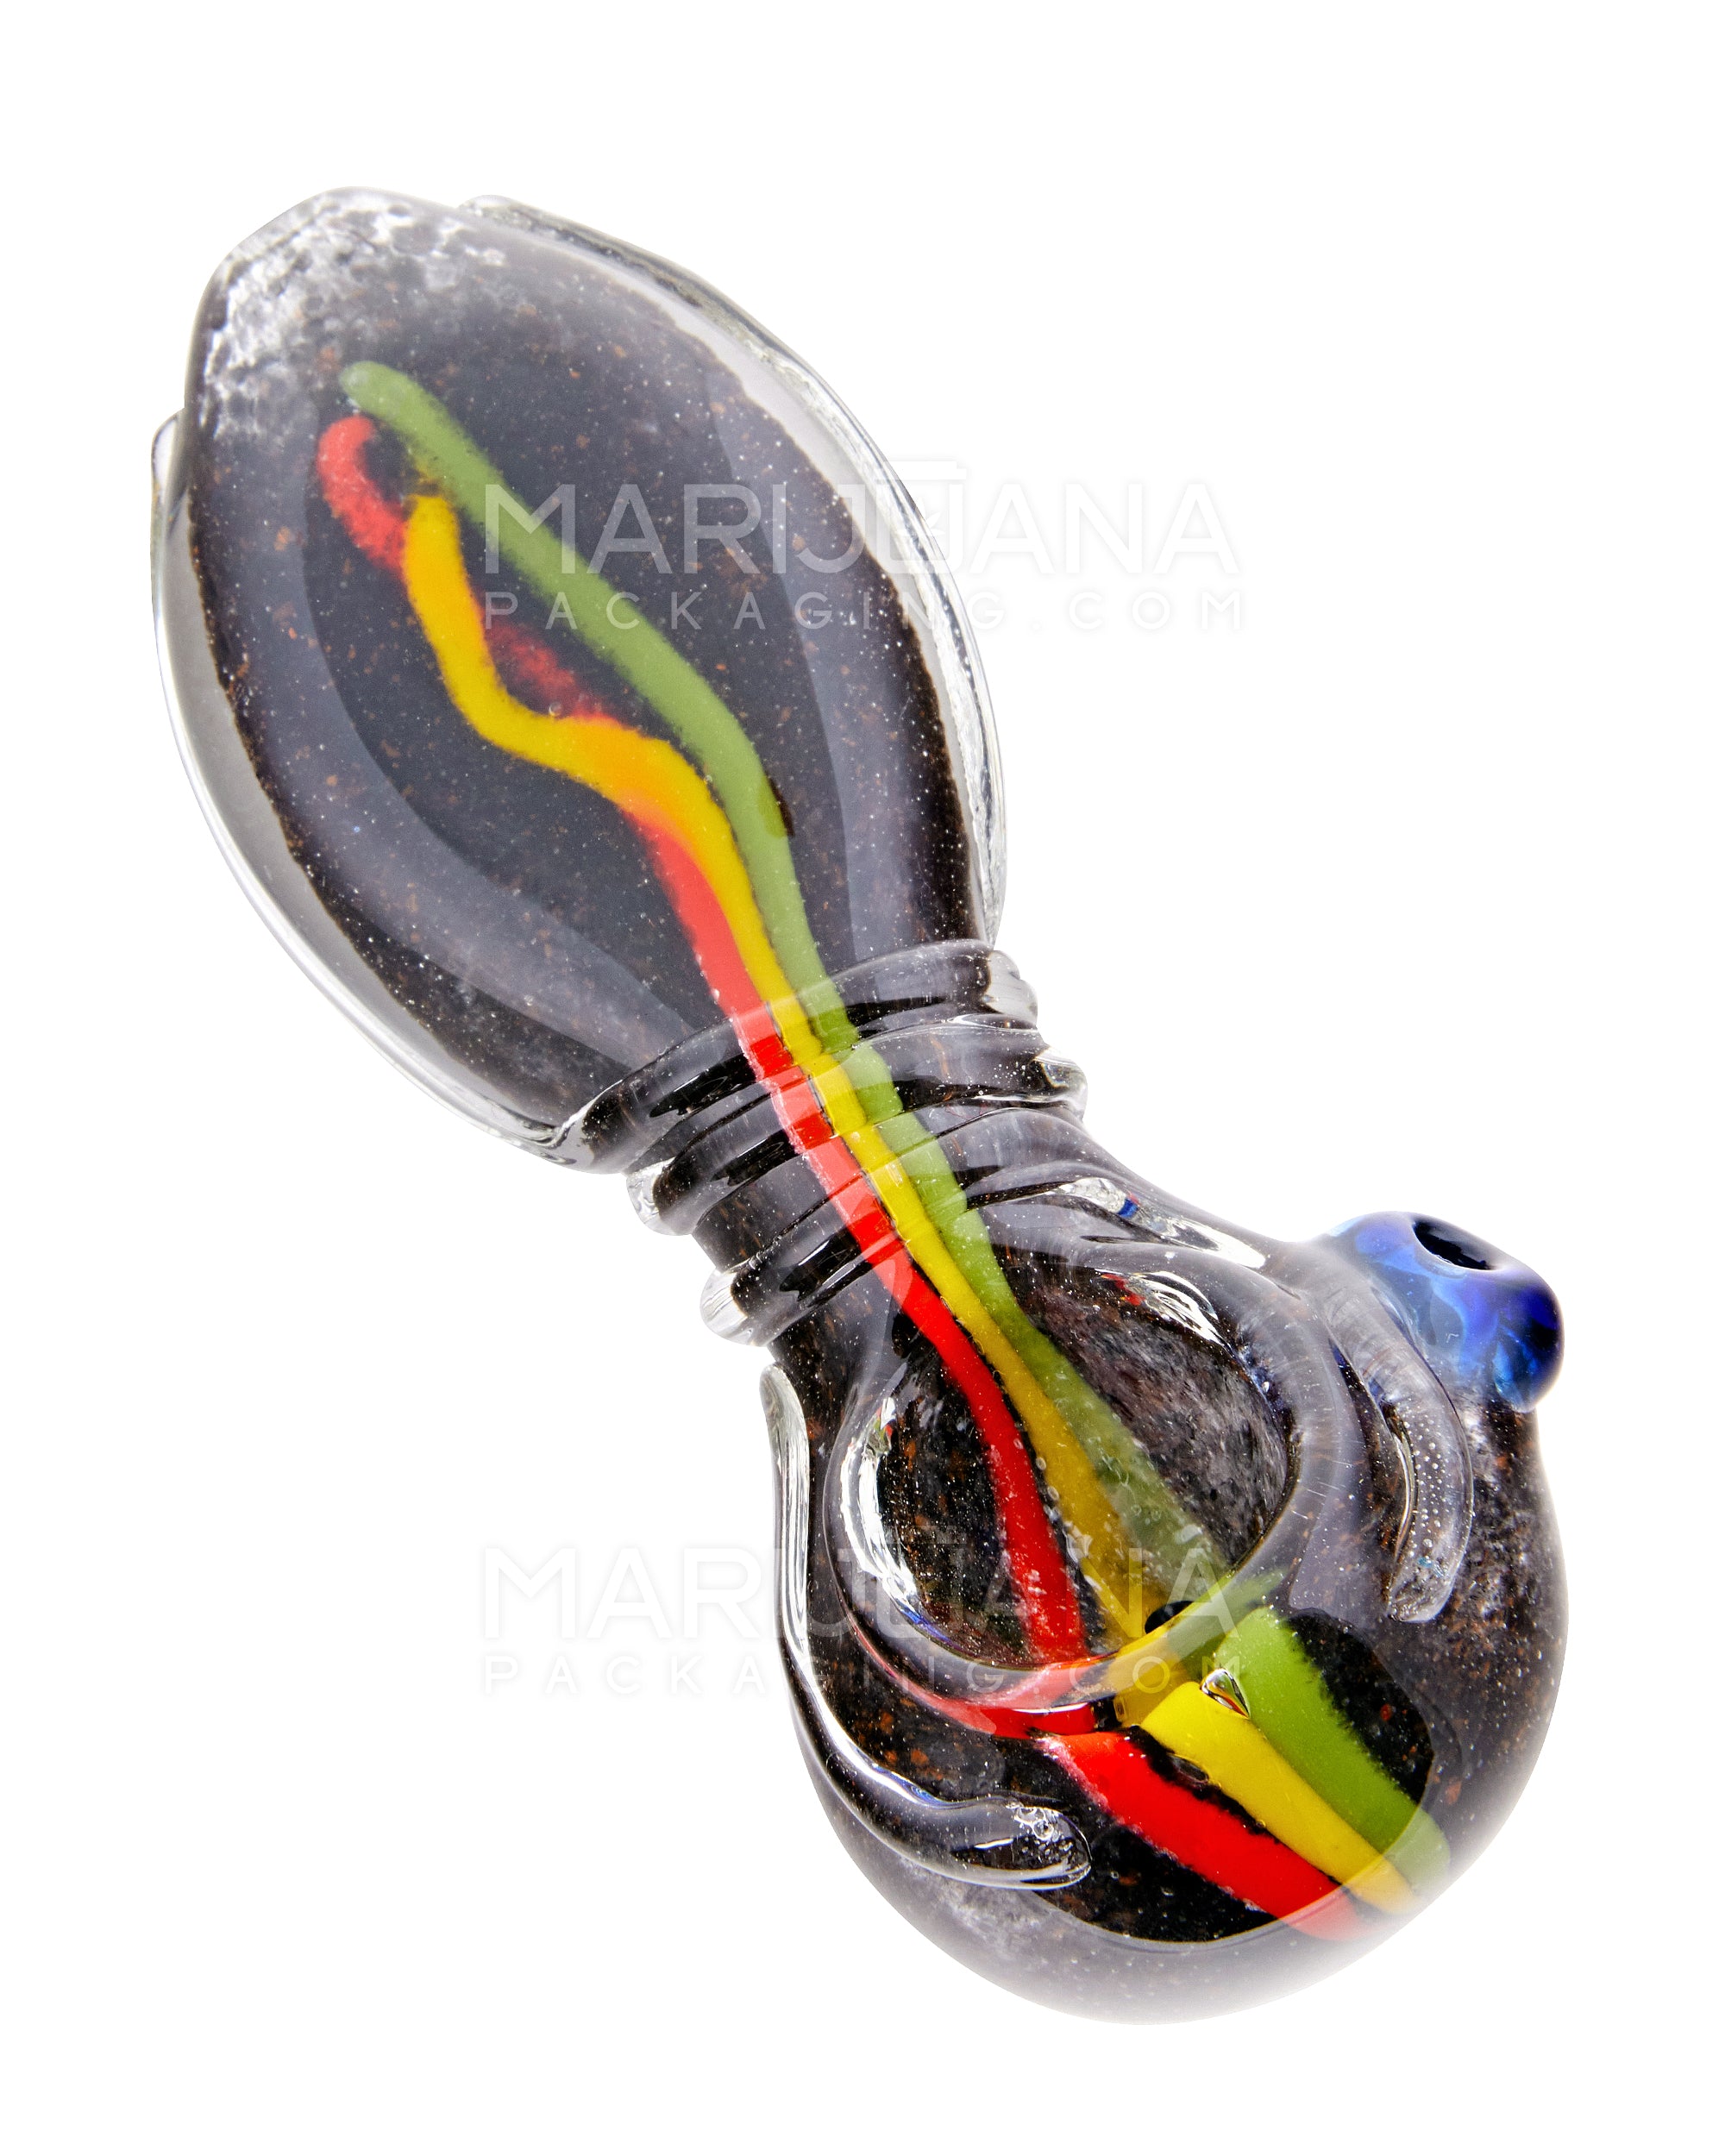 Frit & Striped Ringed Spoon Hand Pipe | 3.5in Long - Glass - Assorted